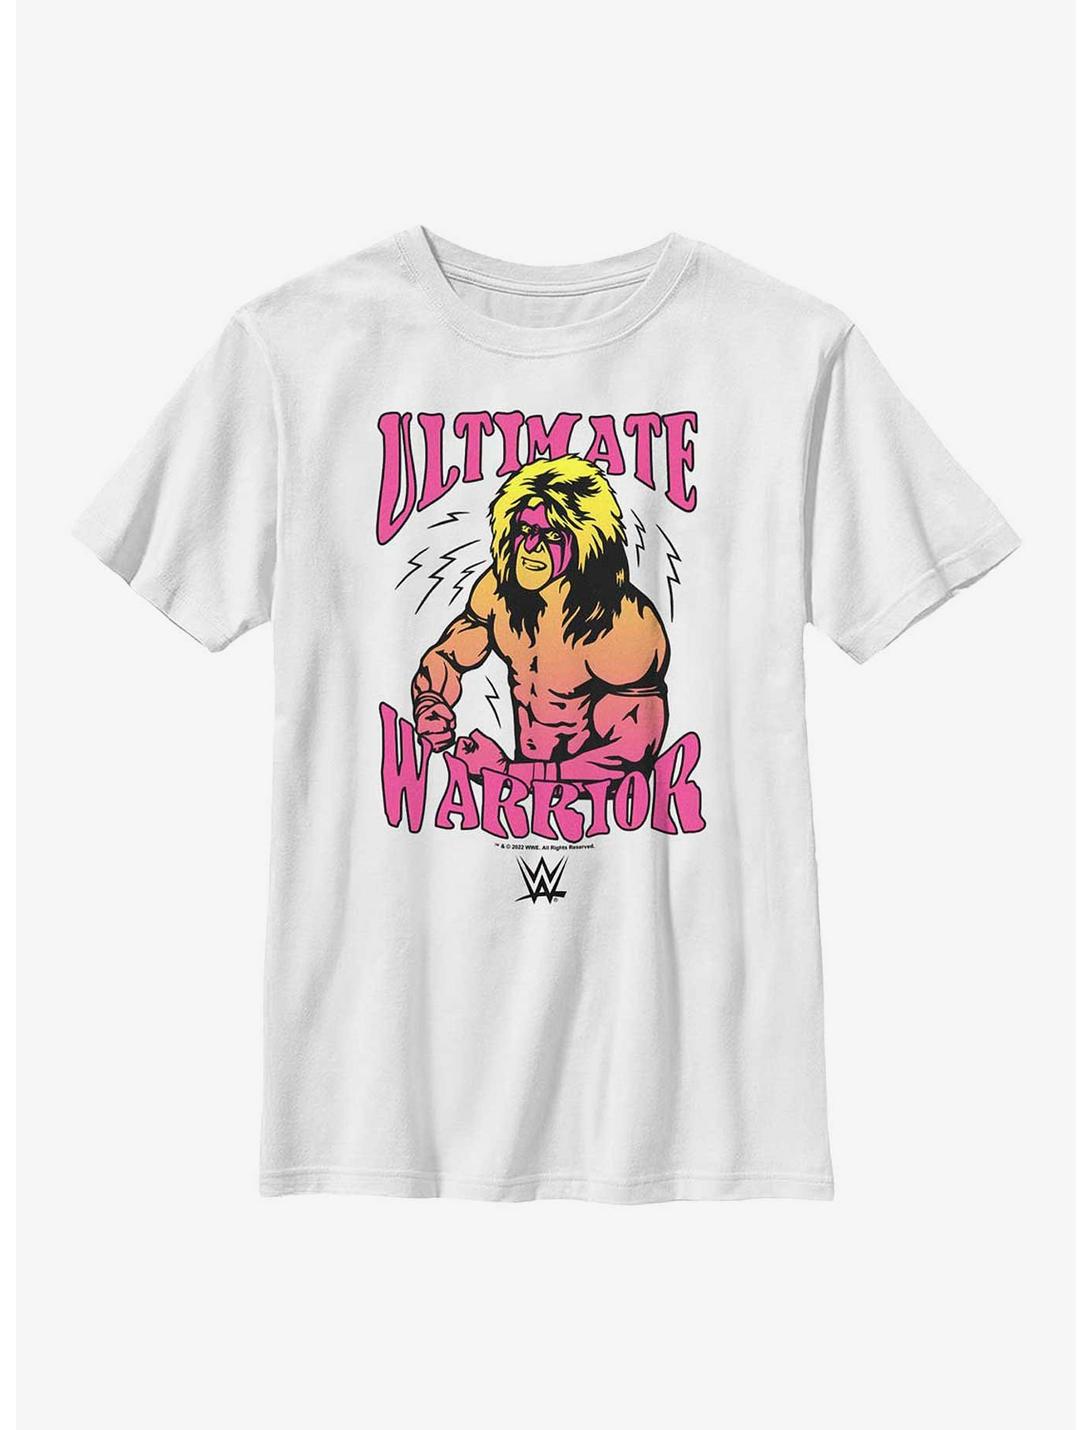 WWE Retro Ultimate Warrior Youth T-Shirt, WHITE, hi-res